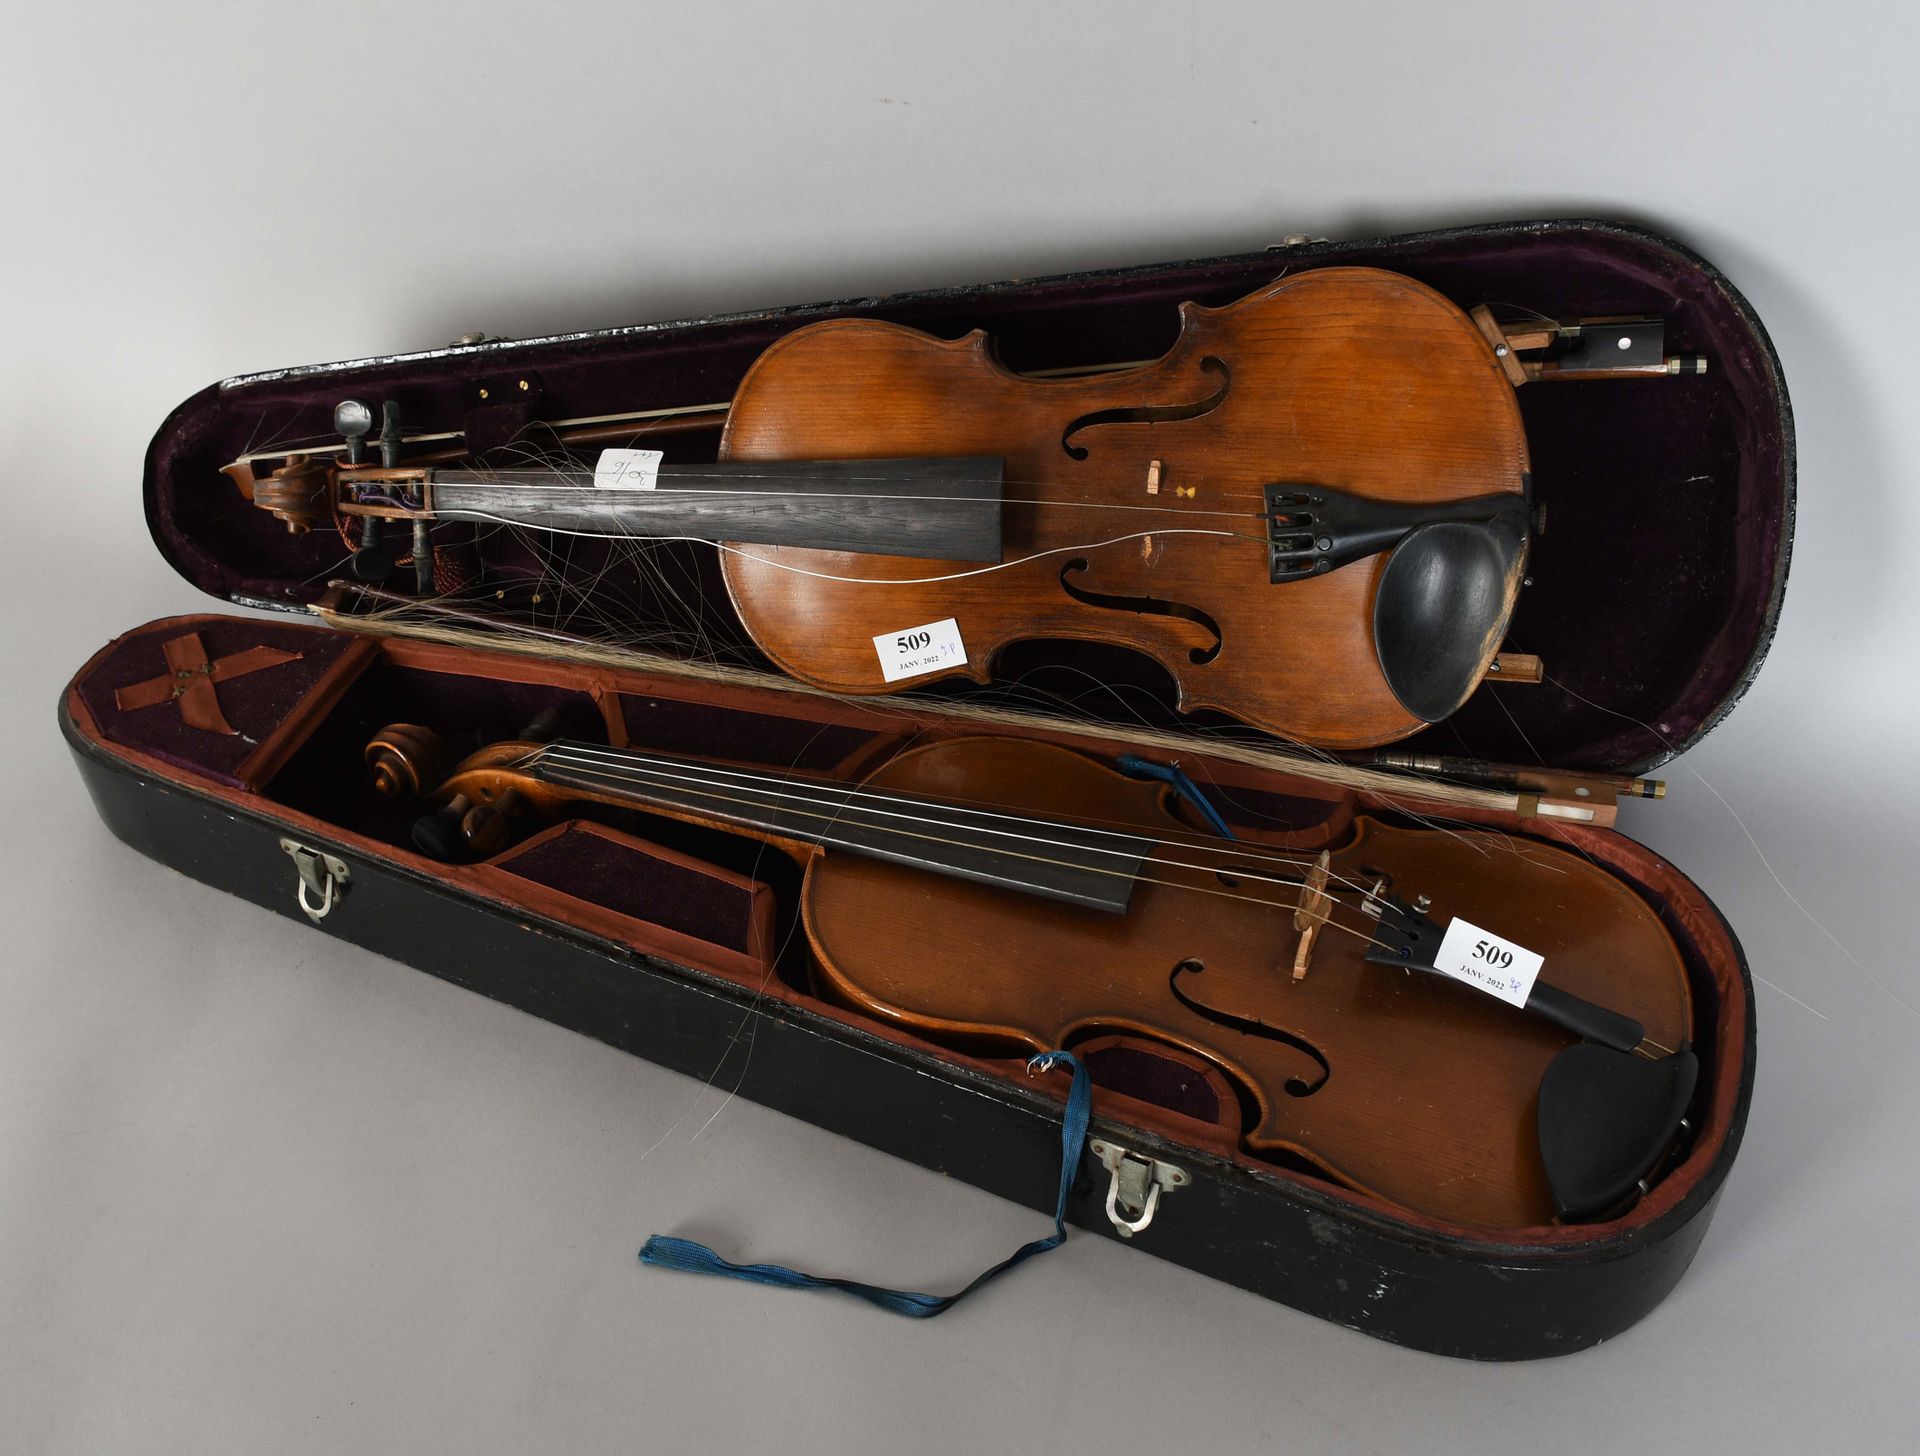 Null One plus one old violins and bows - Accident